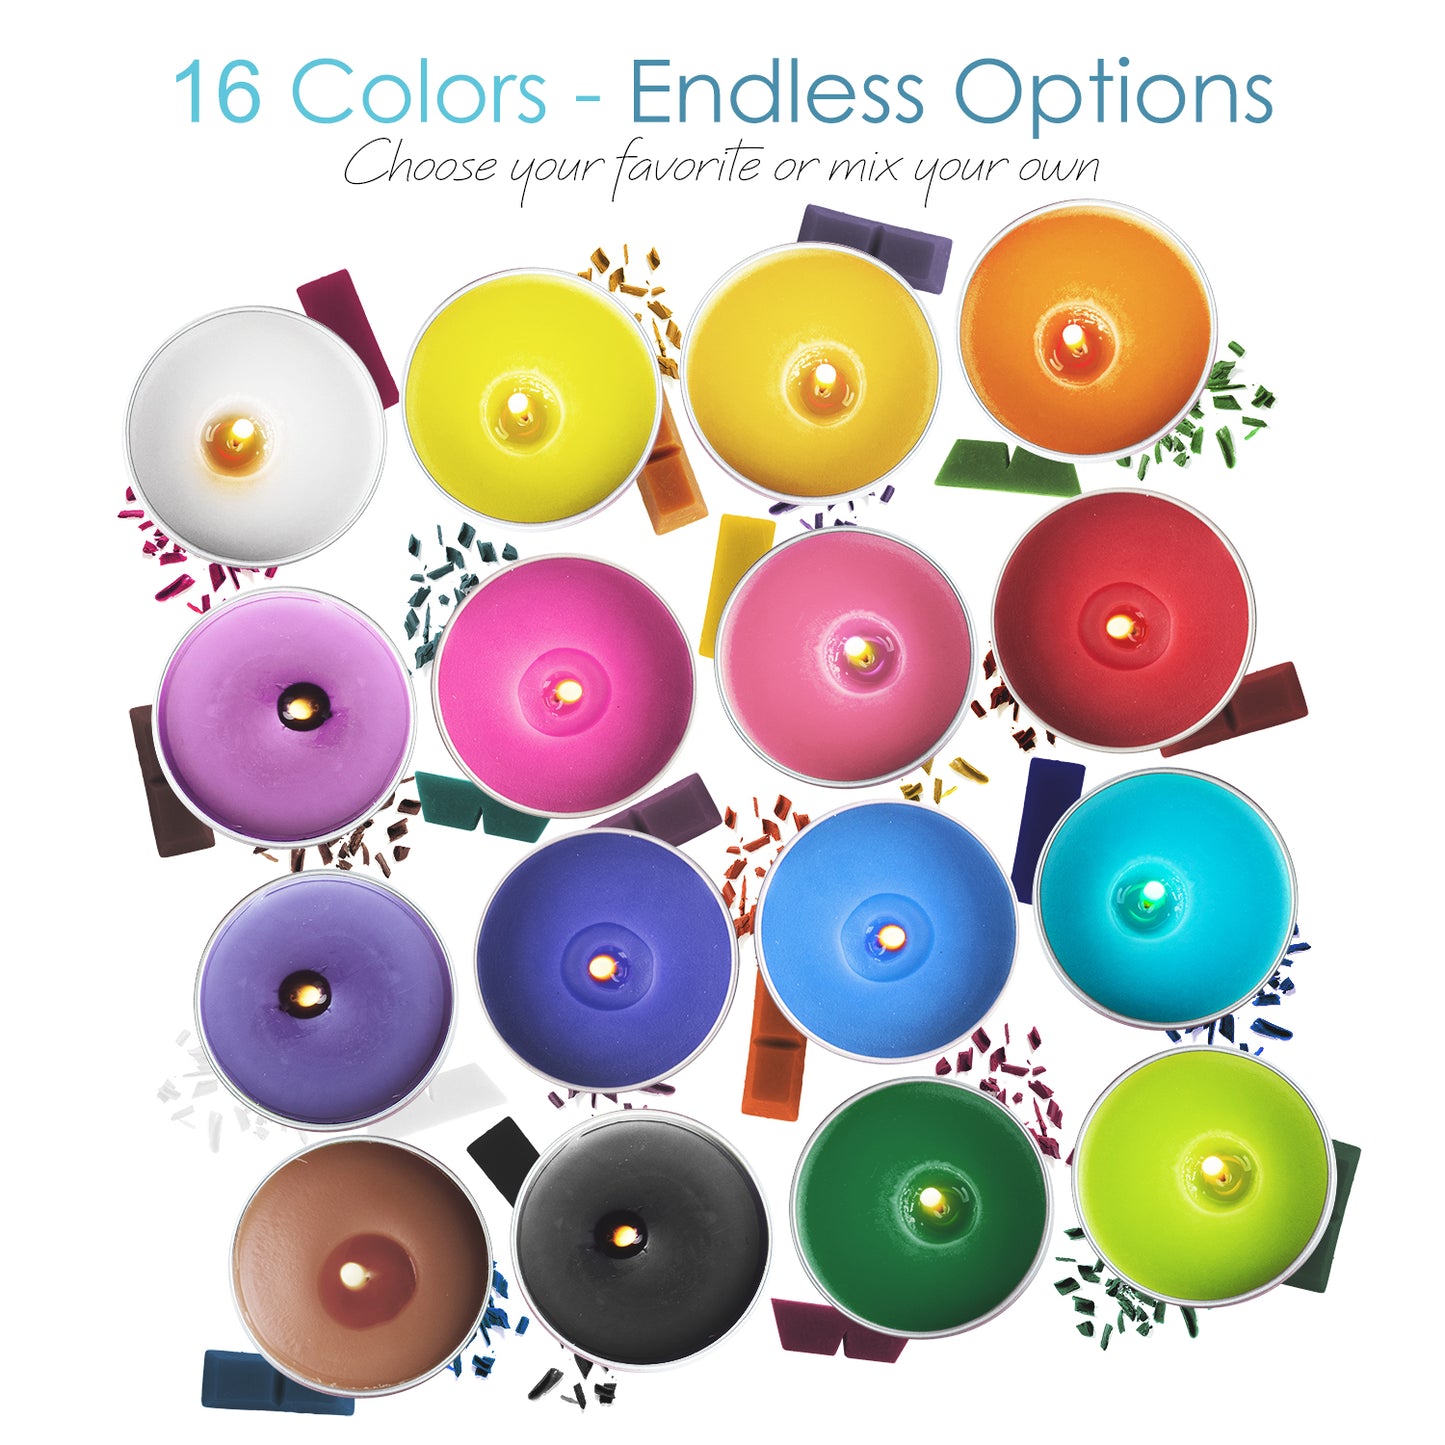 Hearth & Harbor DIY candle kit with 16 different colors